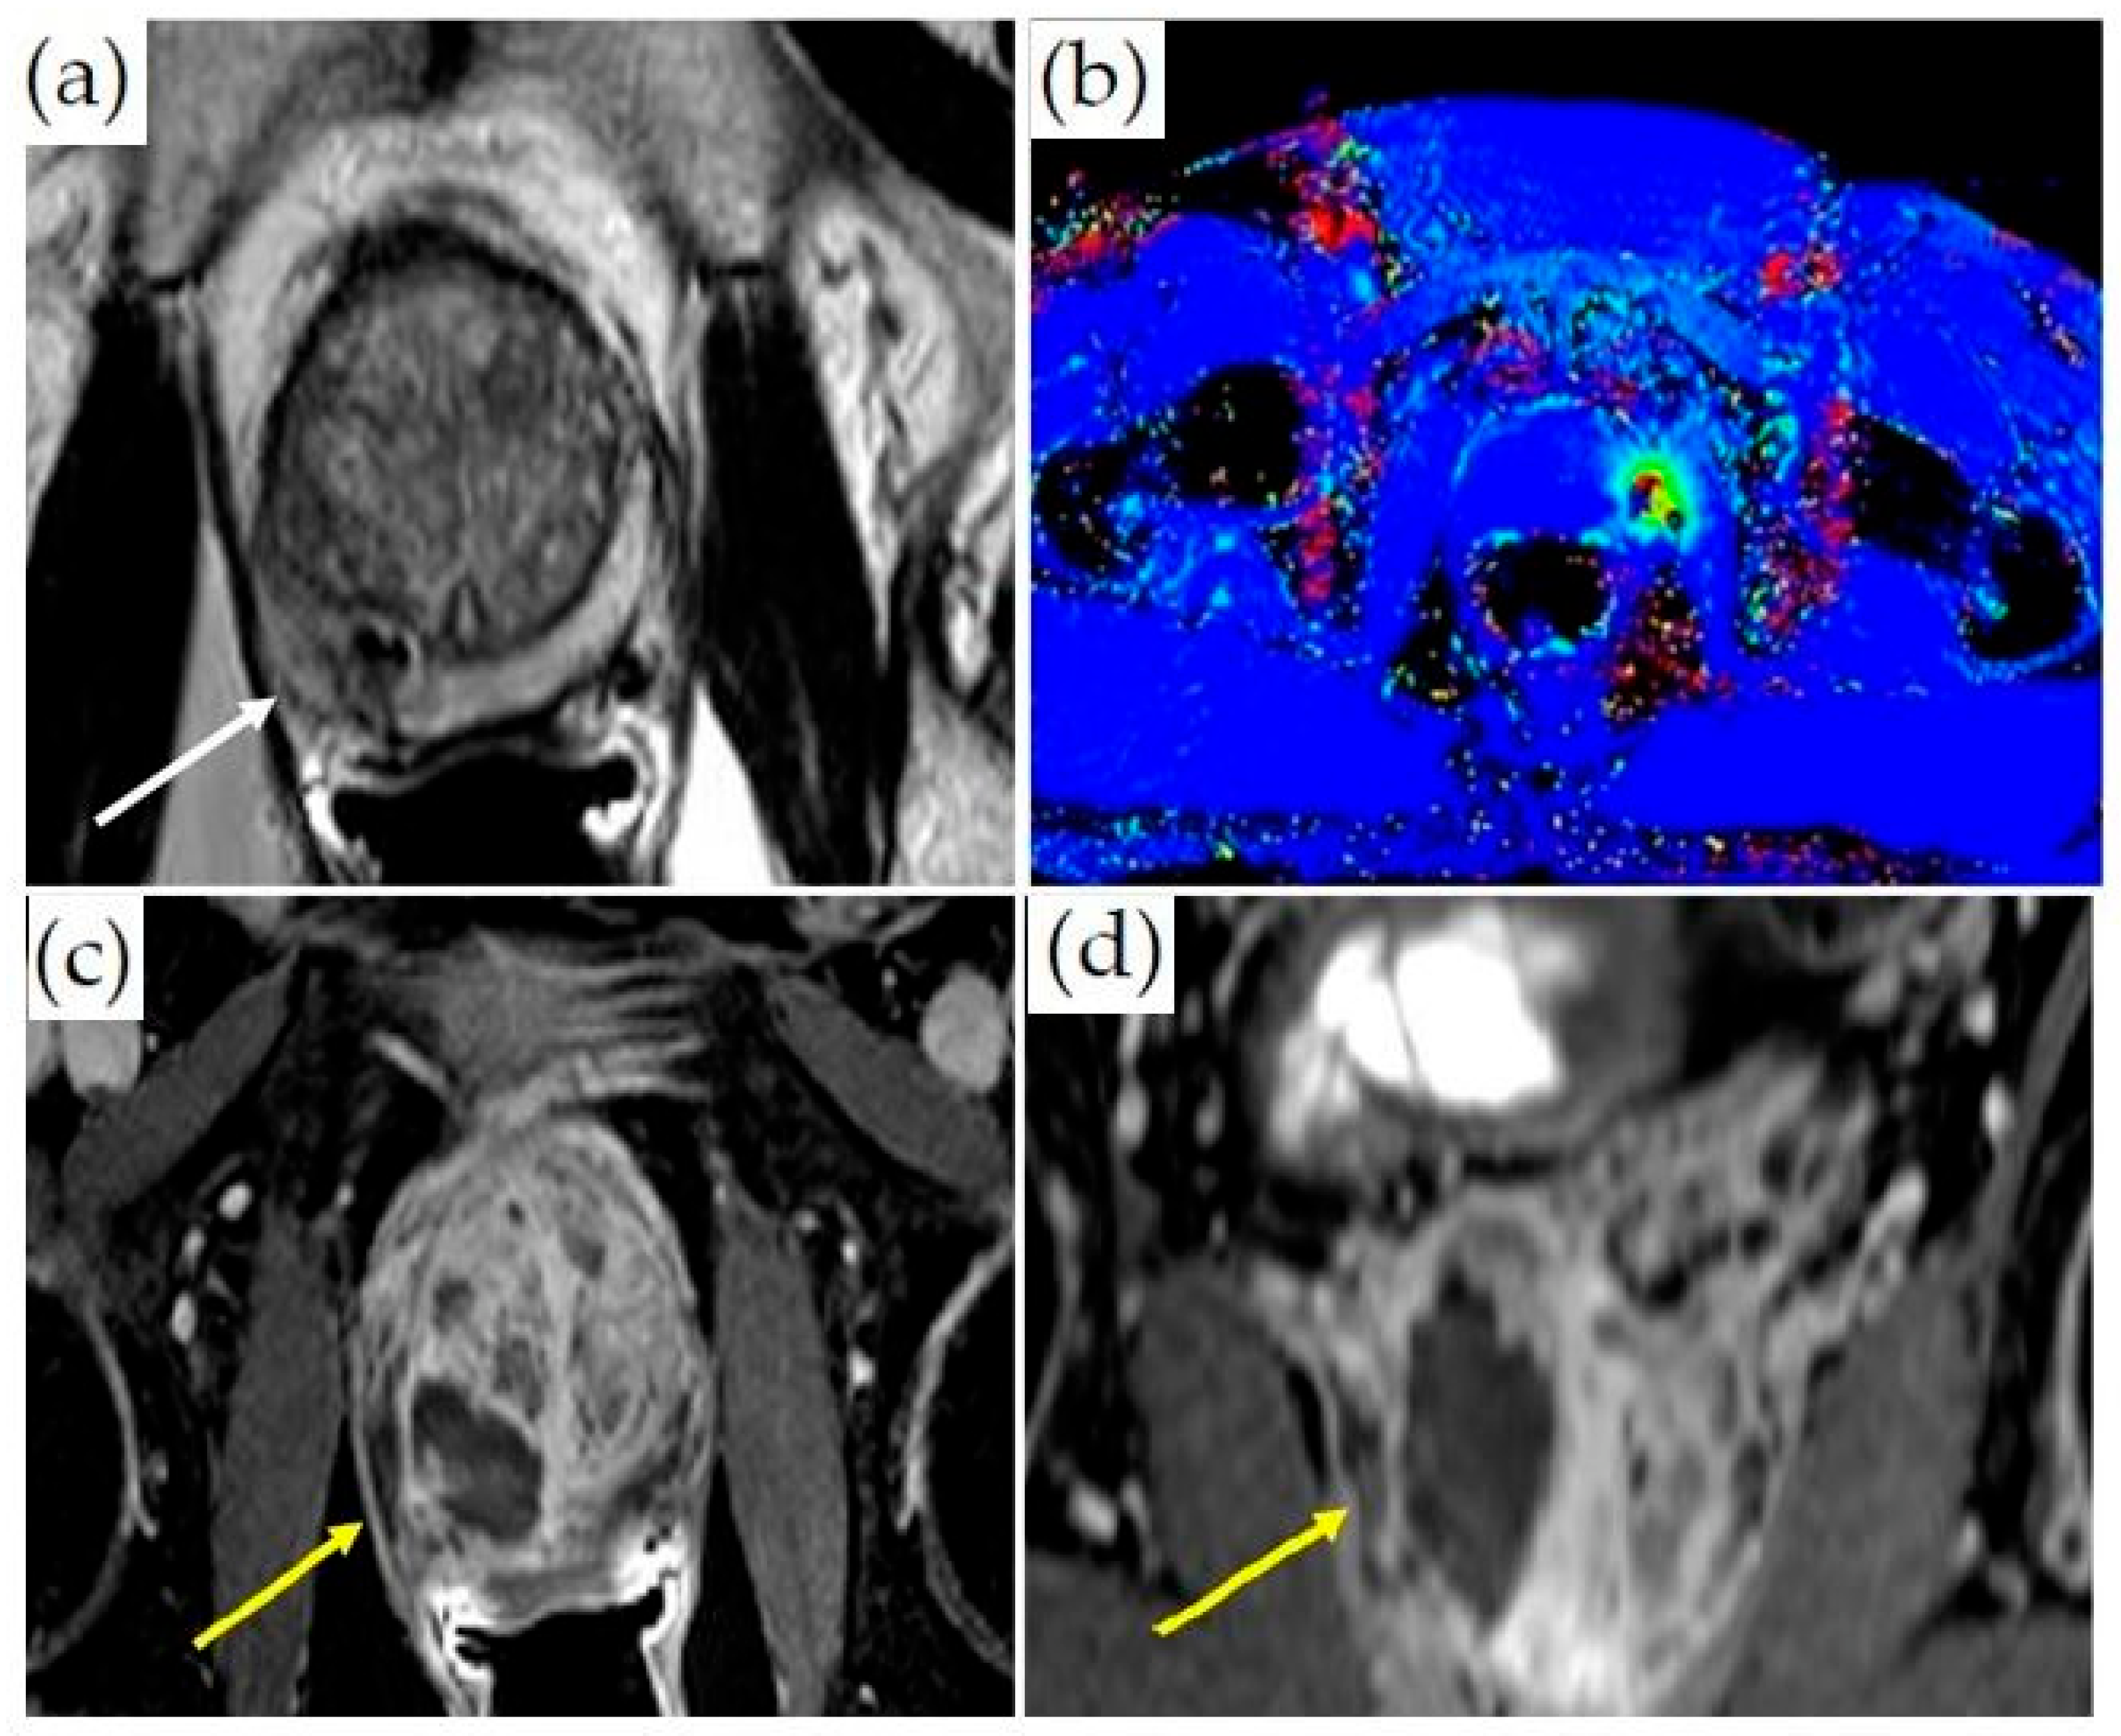 Cancers | Free Full-Text | Real-Time MRI-Guided Prostate Interventions